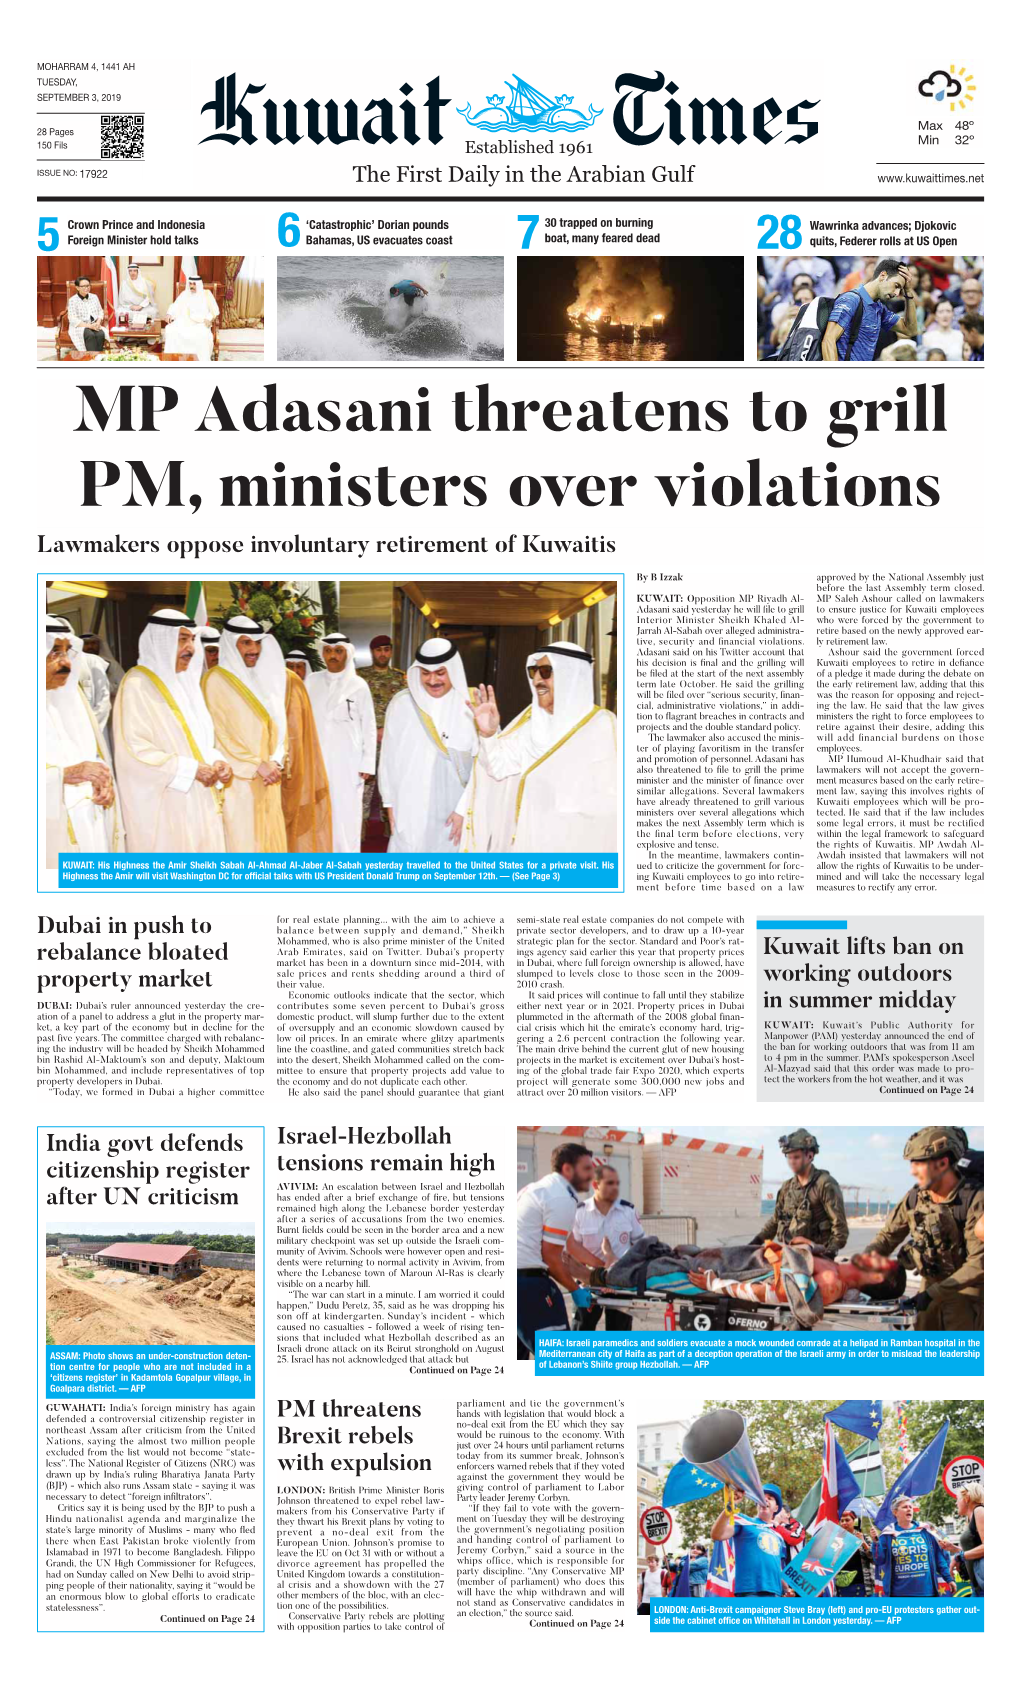 MP Adasani Threatens to Grill PM, Ministers Over Violations Lawmakers Oppose Involuntary Retirement of Kuwaitis